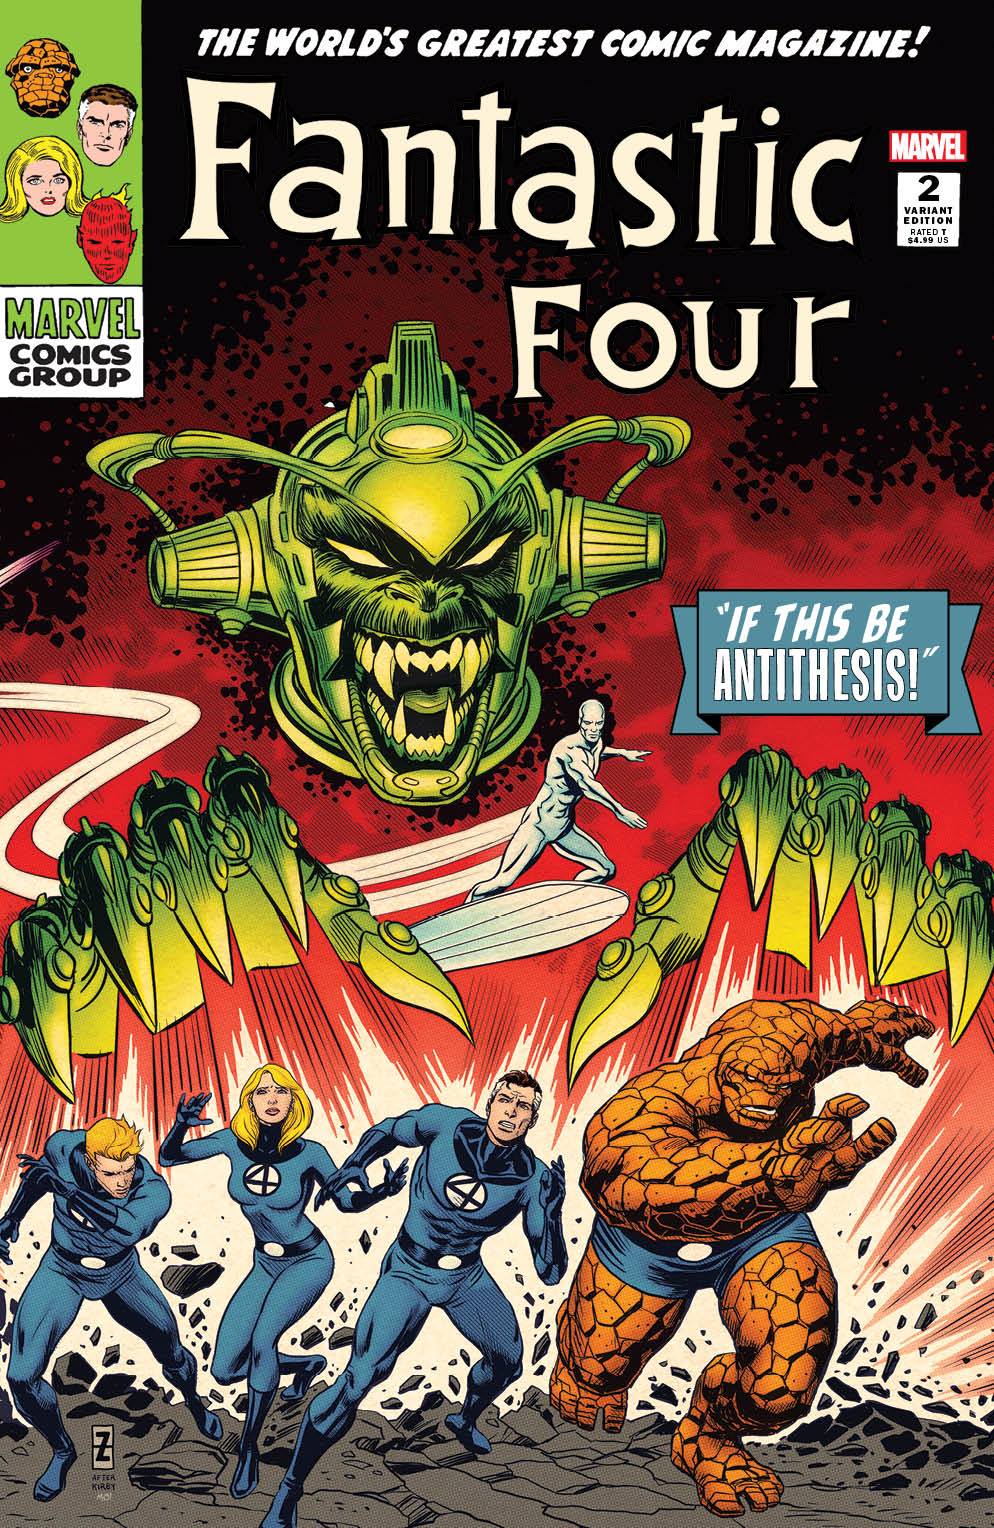 FANTASTIC FOUR ANTITHESIS #2 - *1ST APPEARANCE OF ANTITHESIS!* Limited Variant by Patrick Zircher - IN HAND! - Collectors Choice Comics